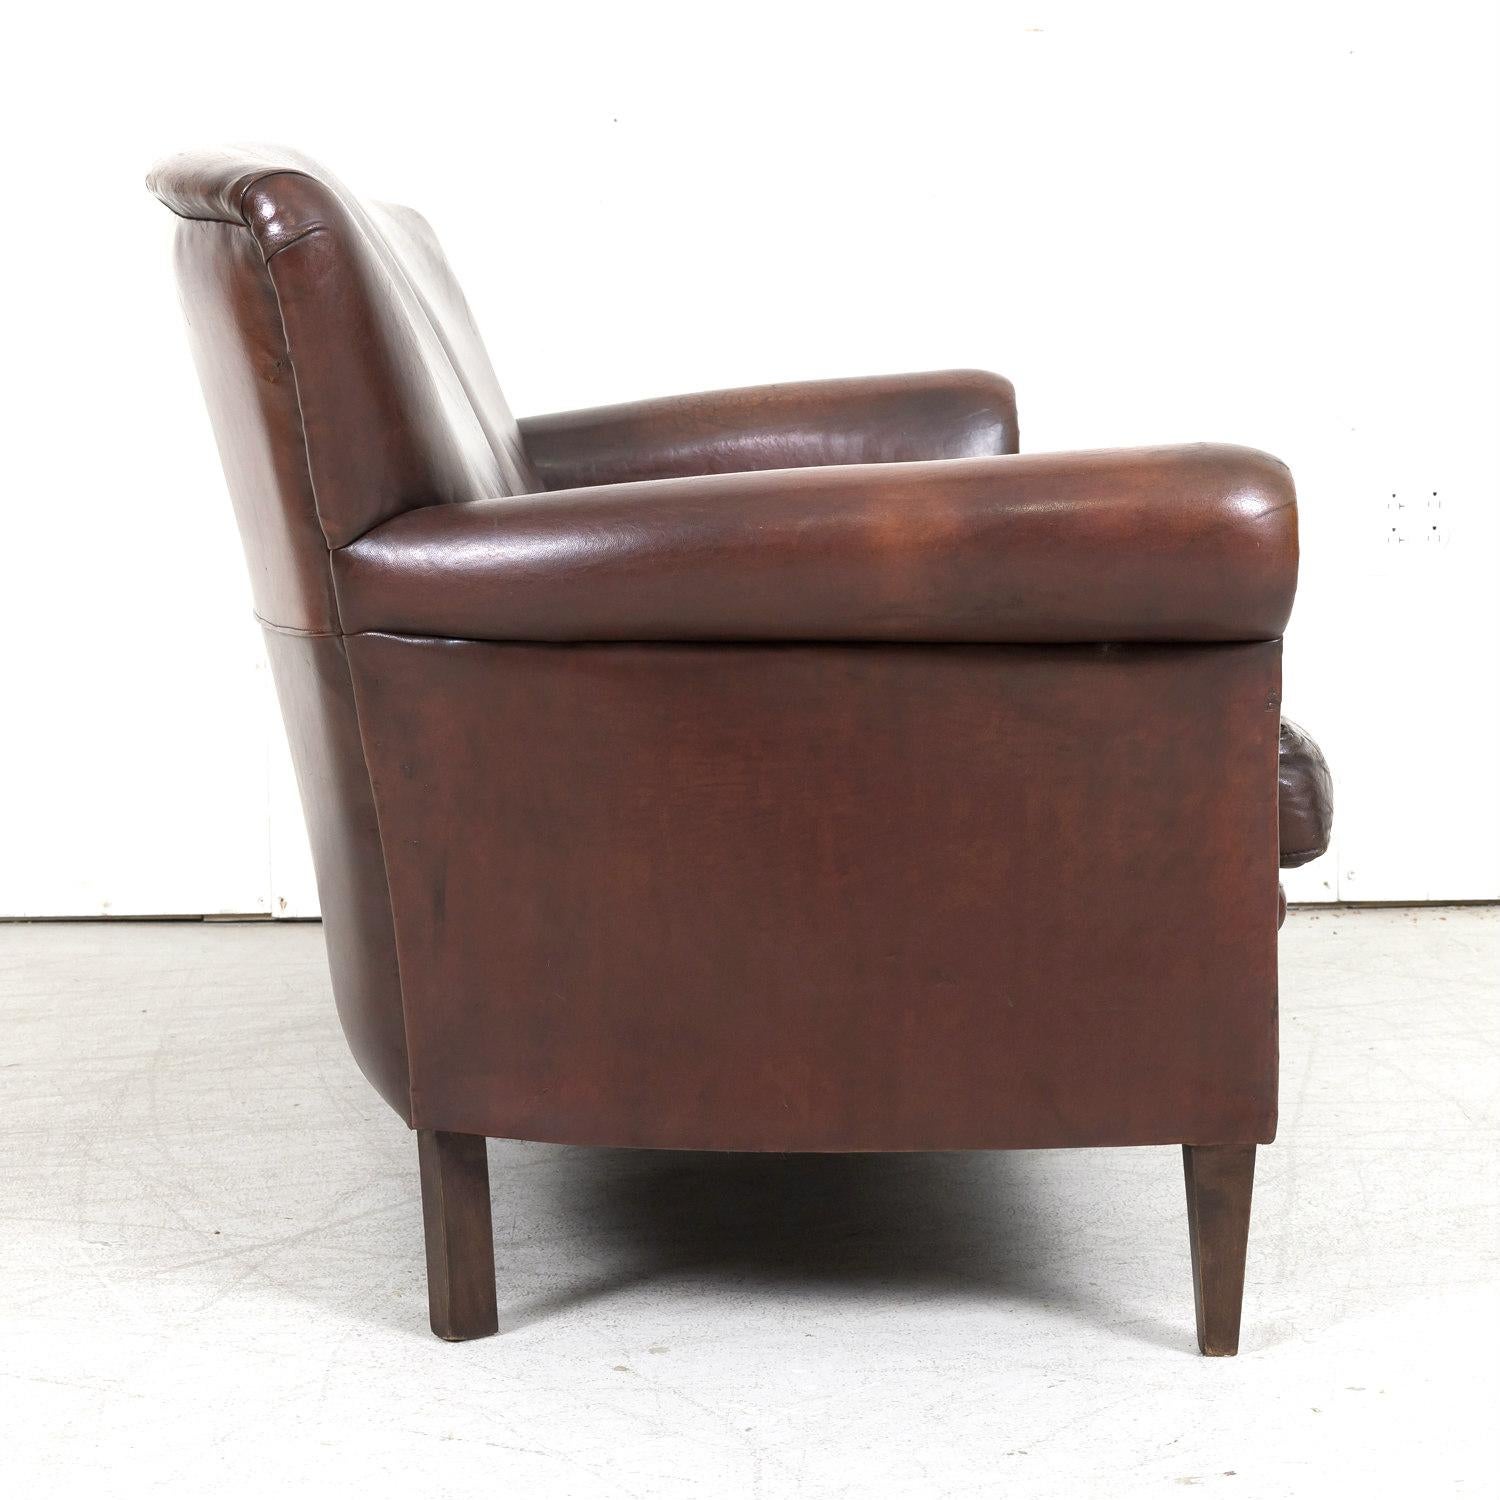 20th Century French Art Deco Settee or Sofa in Original Dark Brown Leather For Sale 9